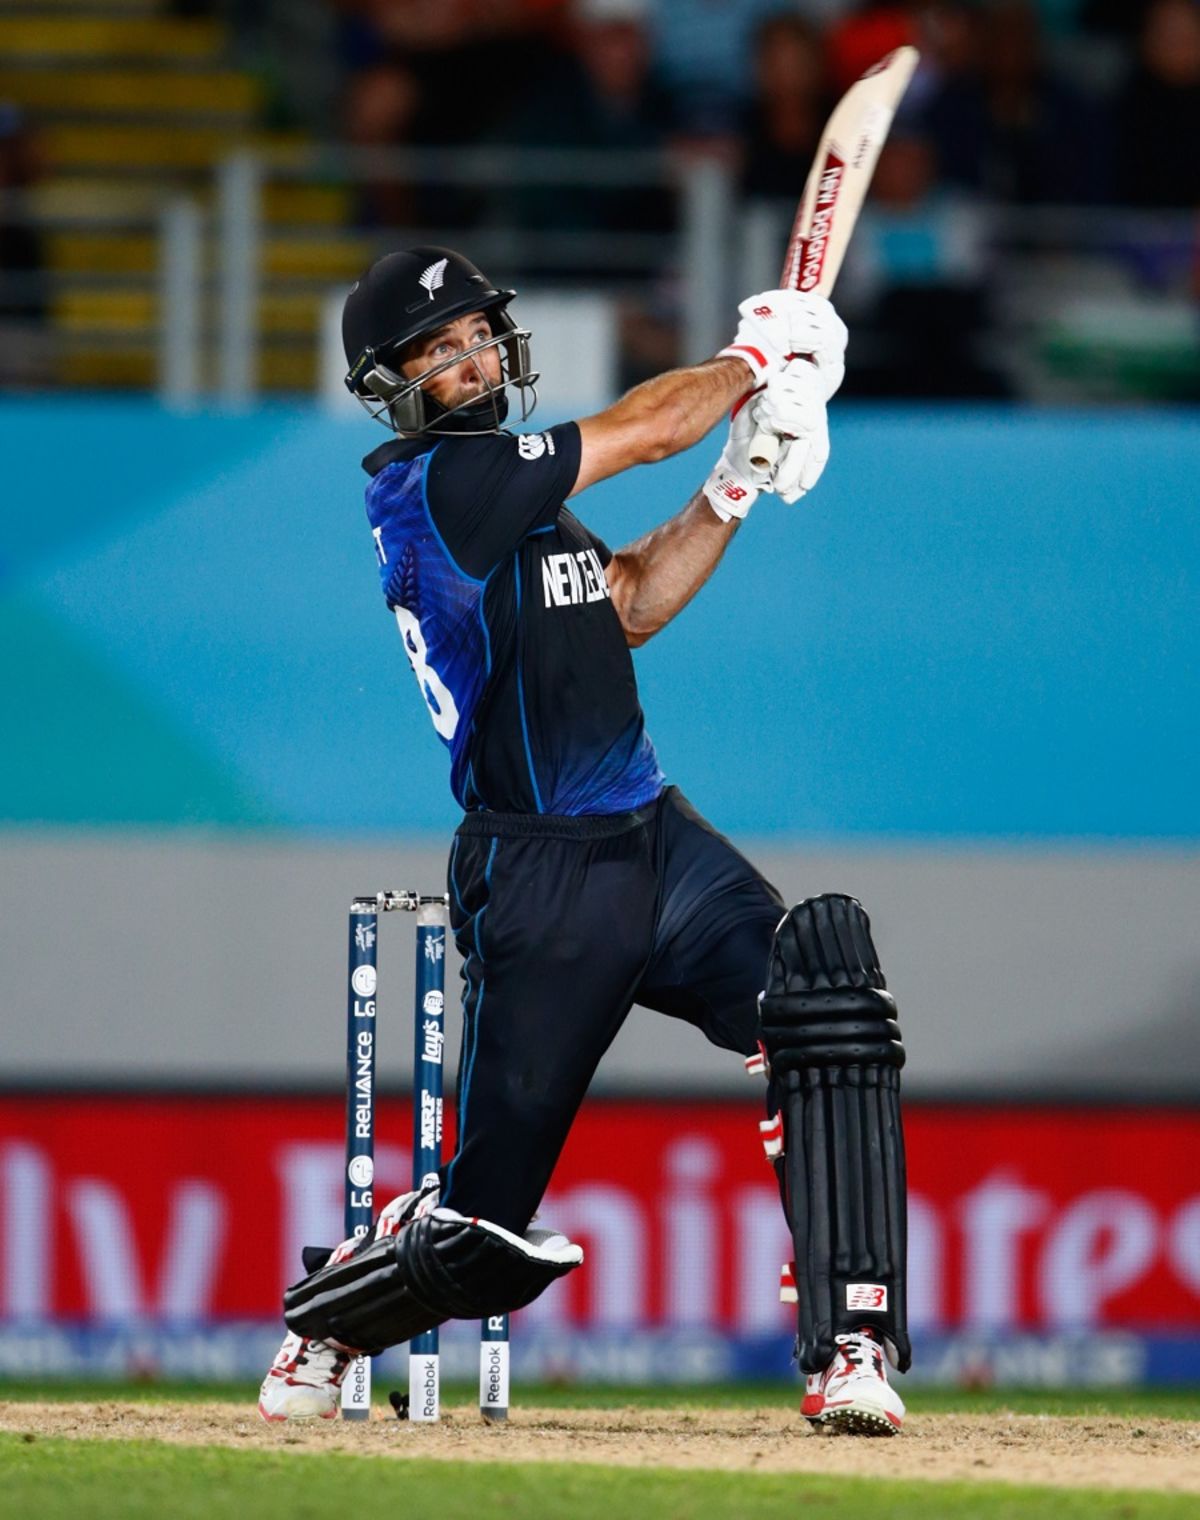 Grant Elliott sealed his team's progress to the final with a six over long-on, New Zealand v South Africa, World Cup 2015, 1st Semi-Final, Auckland, March 24, 2015